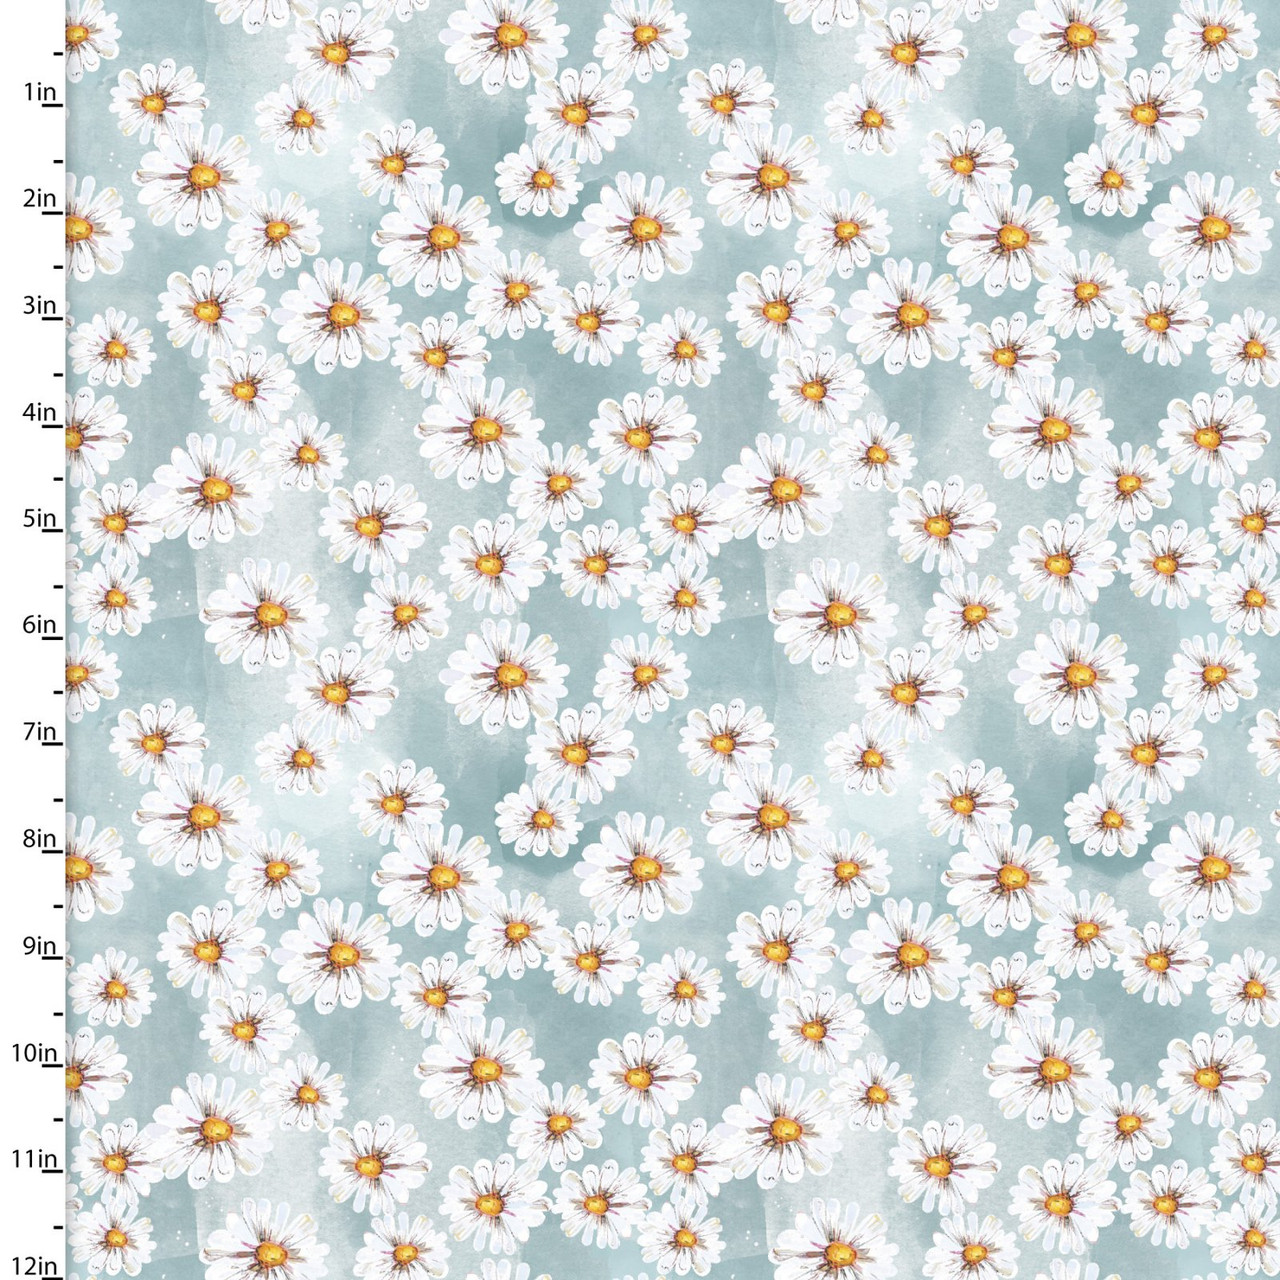 3 Wishes Daisy Bunch Blue Cotton Fabric By Yard